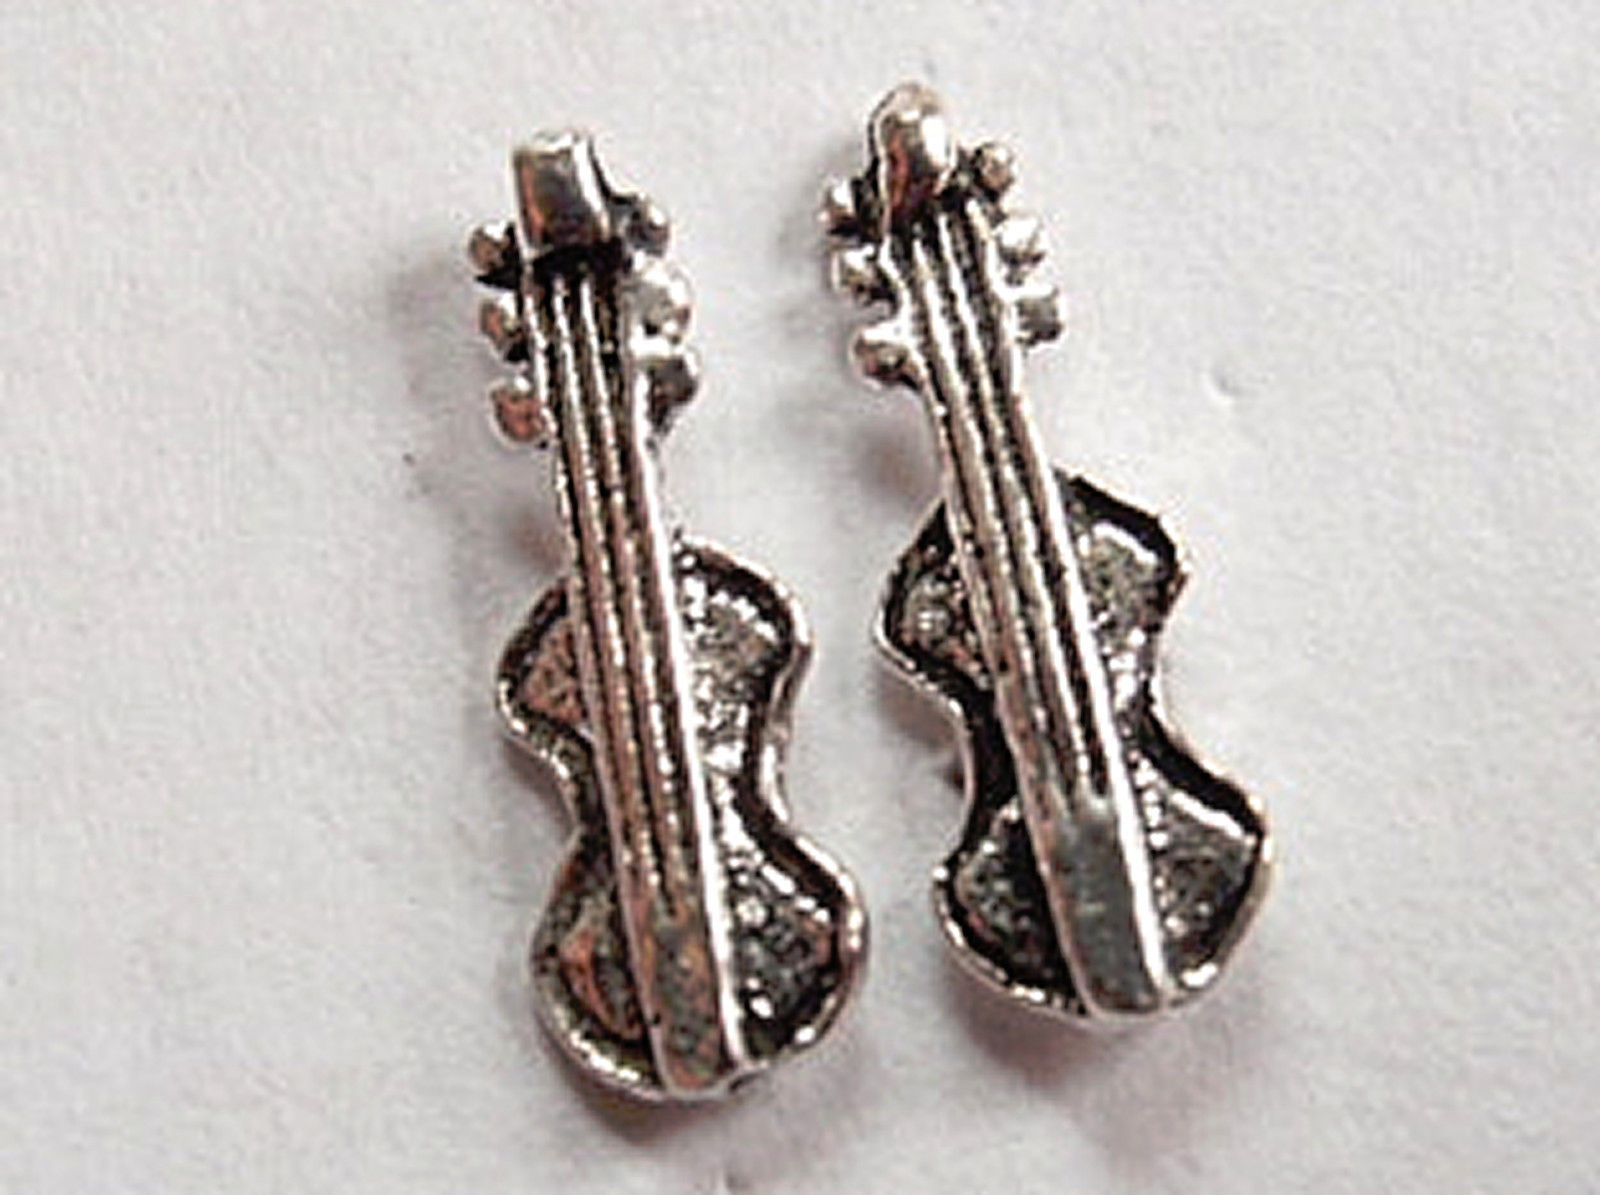 Primary image for 6-String Guitar Stud Earrings 925 Sterling Silver Corona Sun Jewelry guitarist